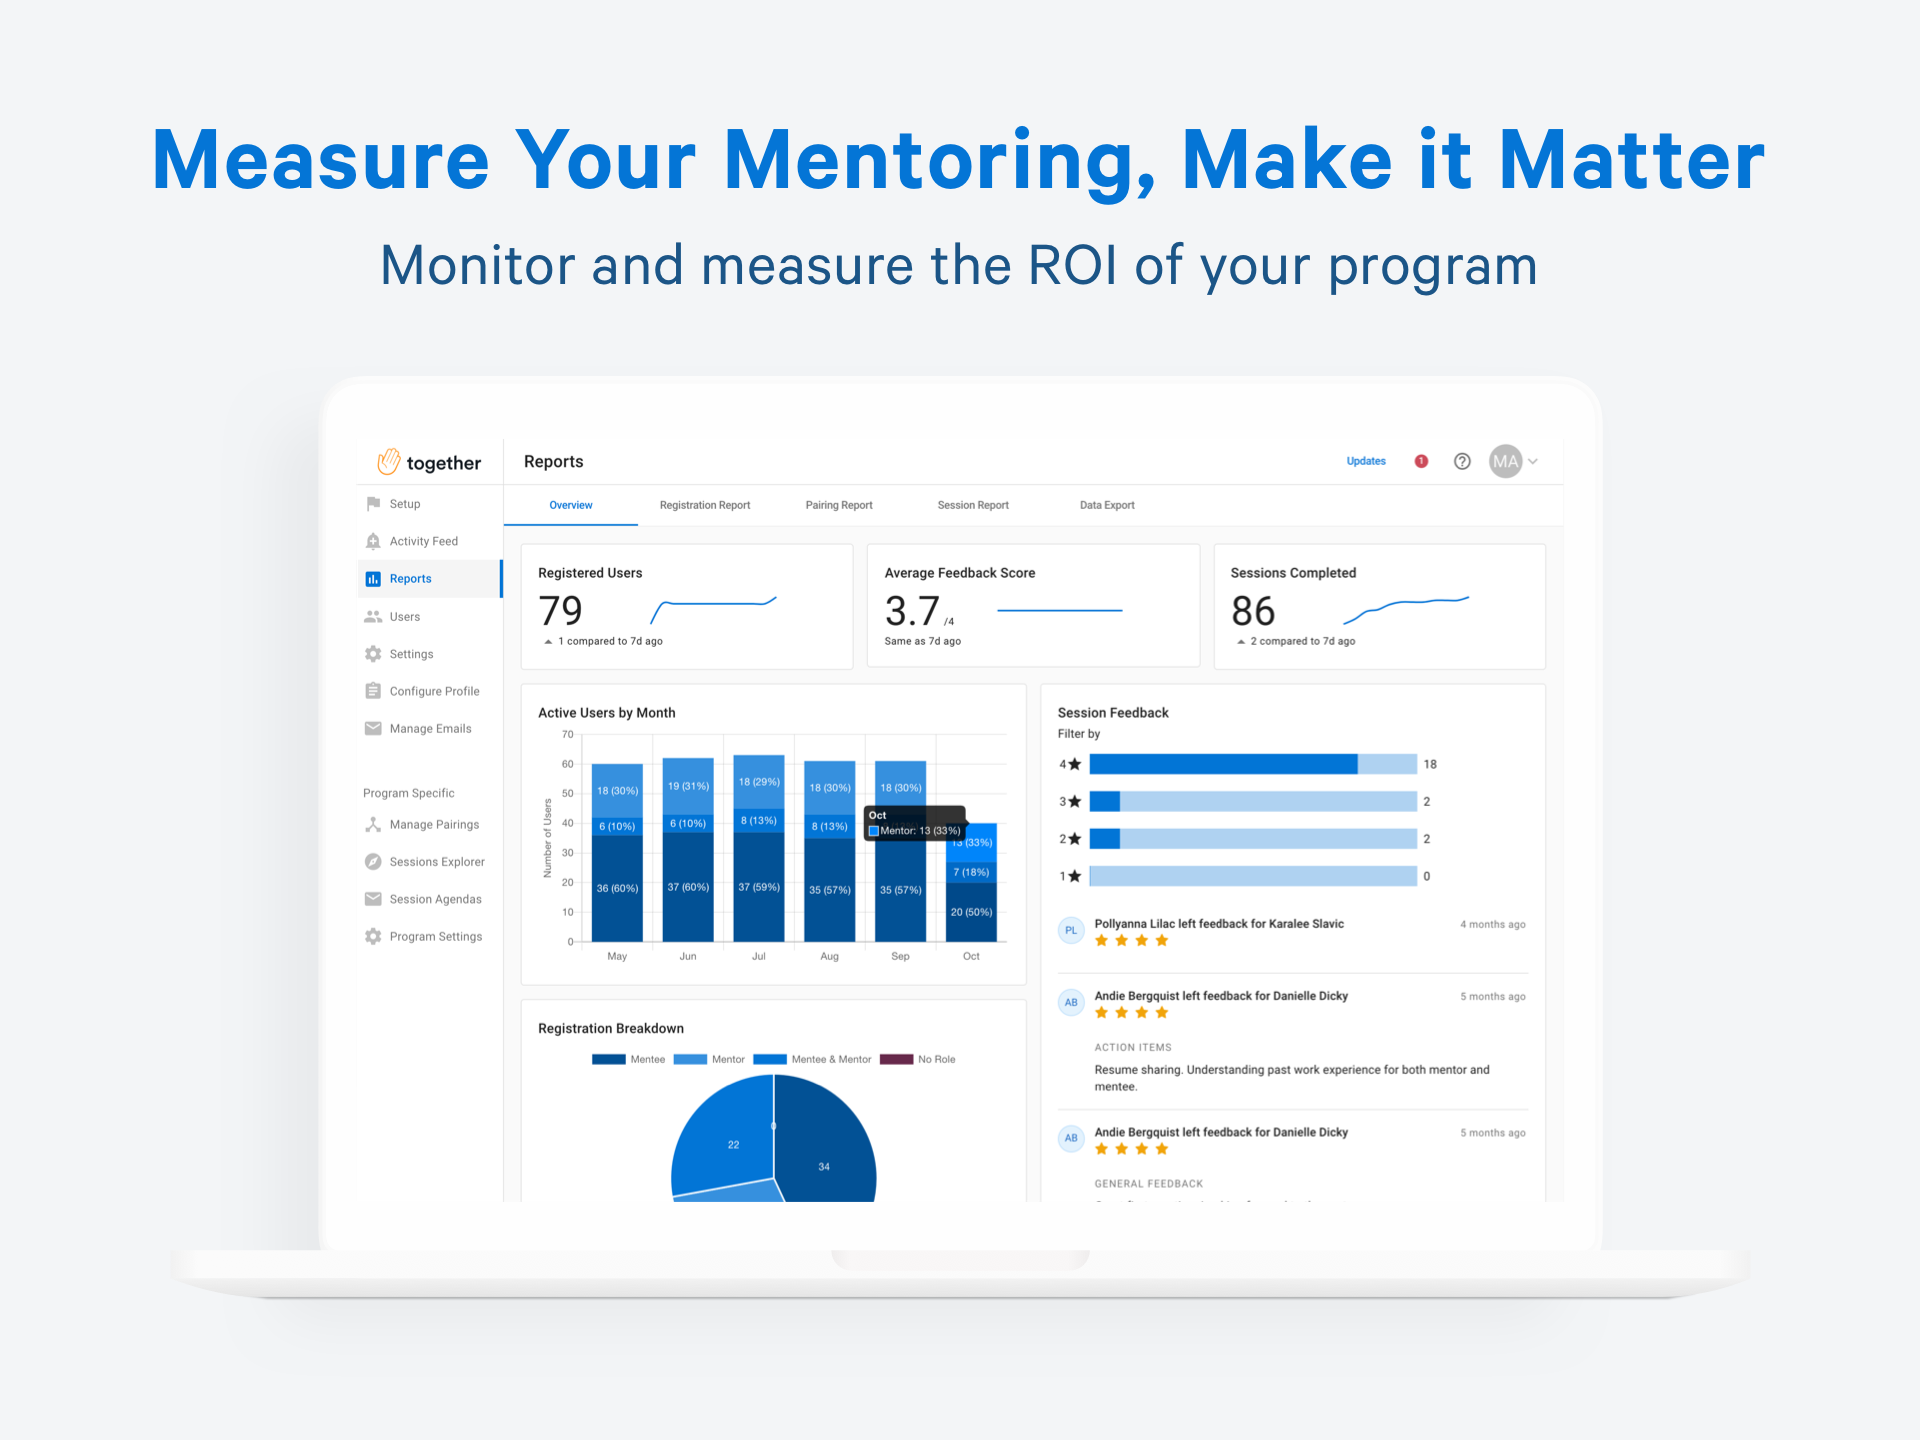 Together Enterprise Mentoring Software - Get program insights with built-in reporting. Measure program activity, health, and engagement and see real progress towards skill development and goals.